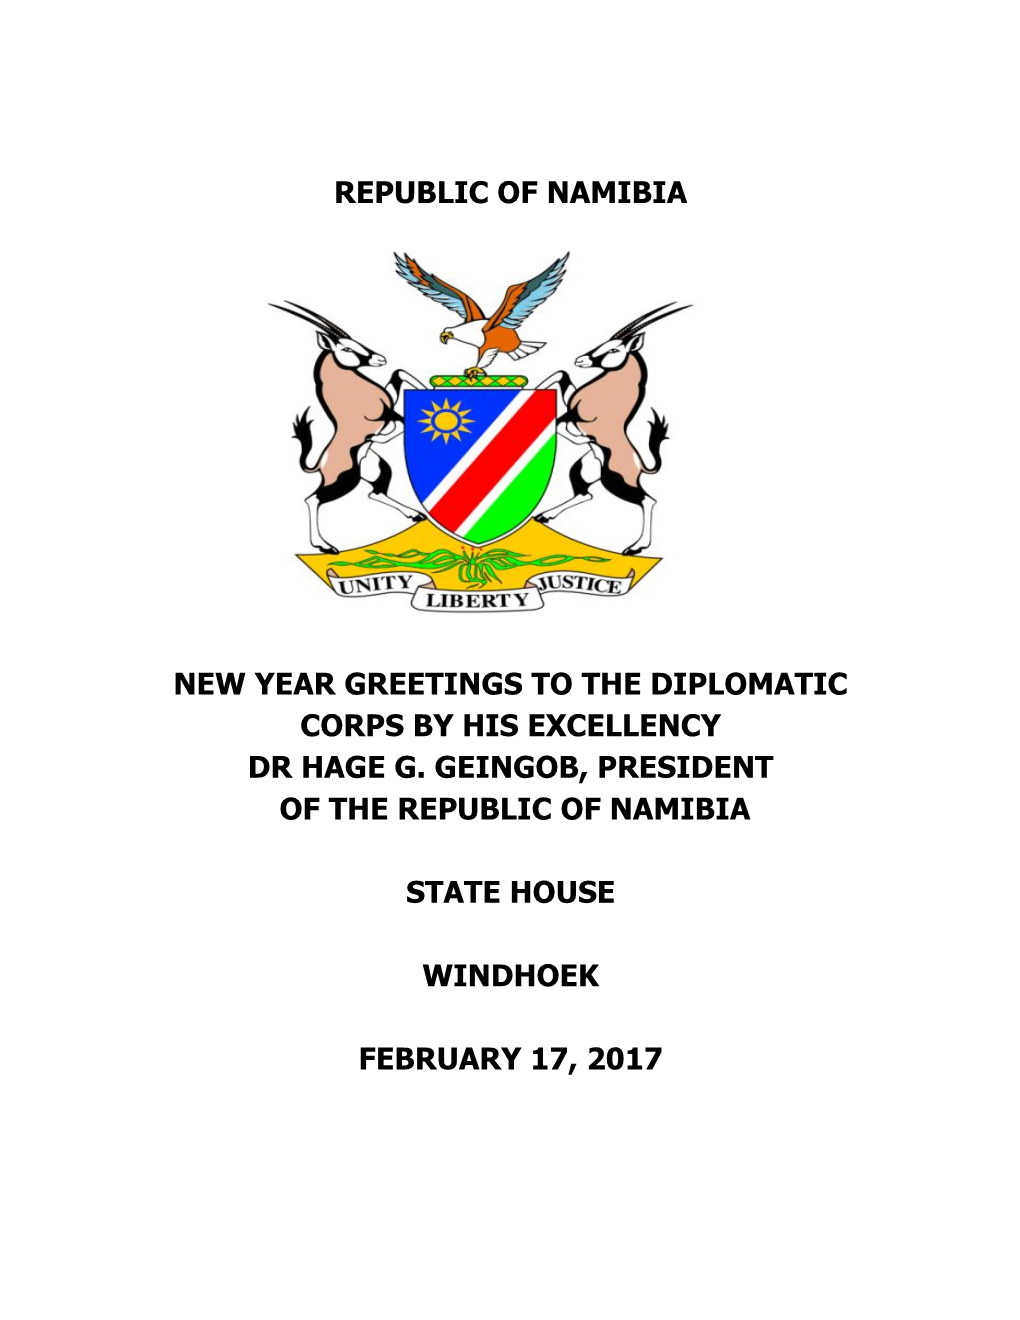 Republic of Namibia New Year Greetings to the Diplomatic